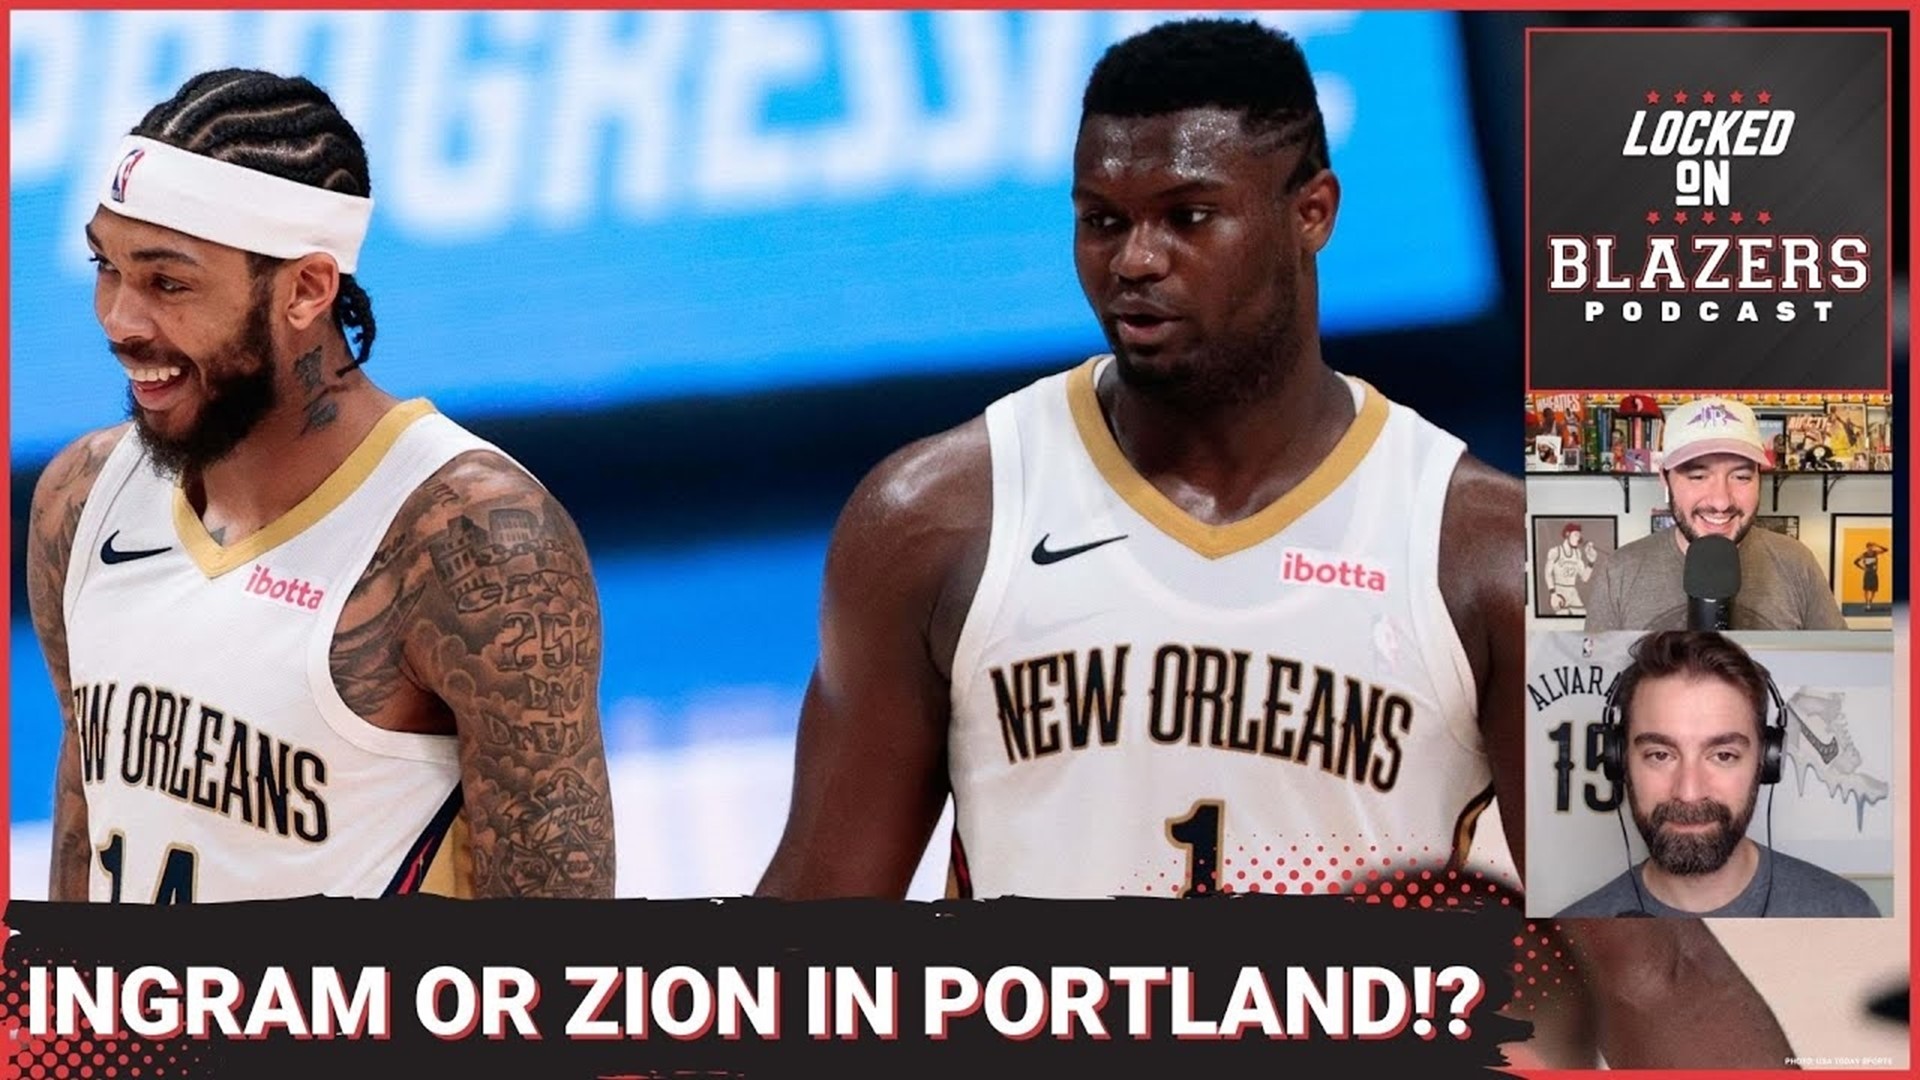 Zion Williamson is dominating the NBA like it's just another